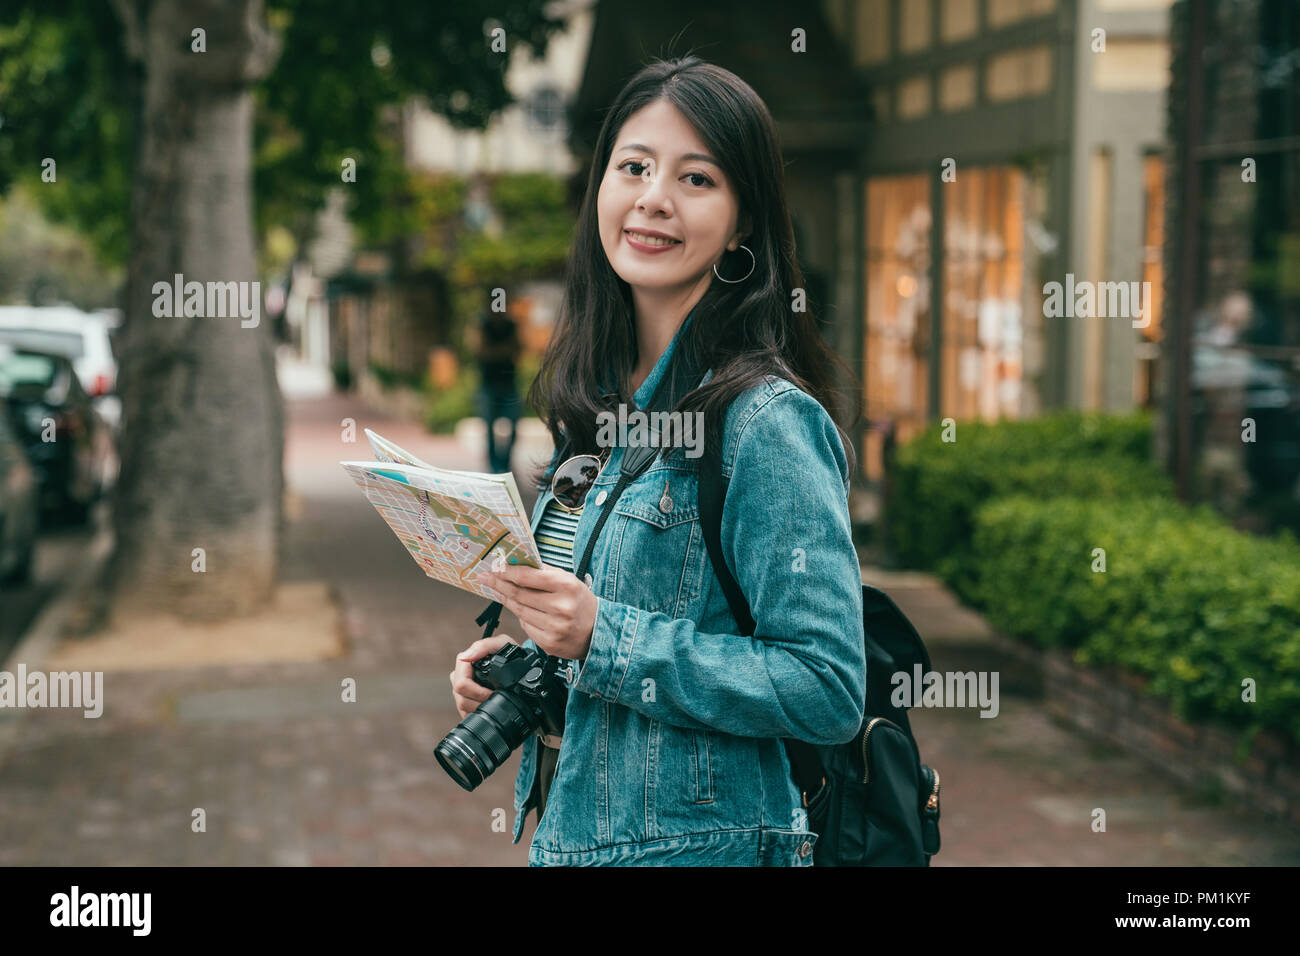 woman smiling joyfully to the camera and holding a guide map in hands while walking sightseeing. Stock Photo